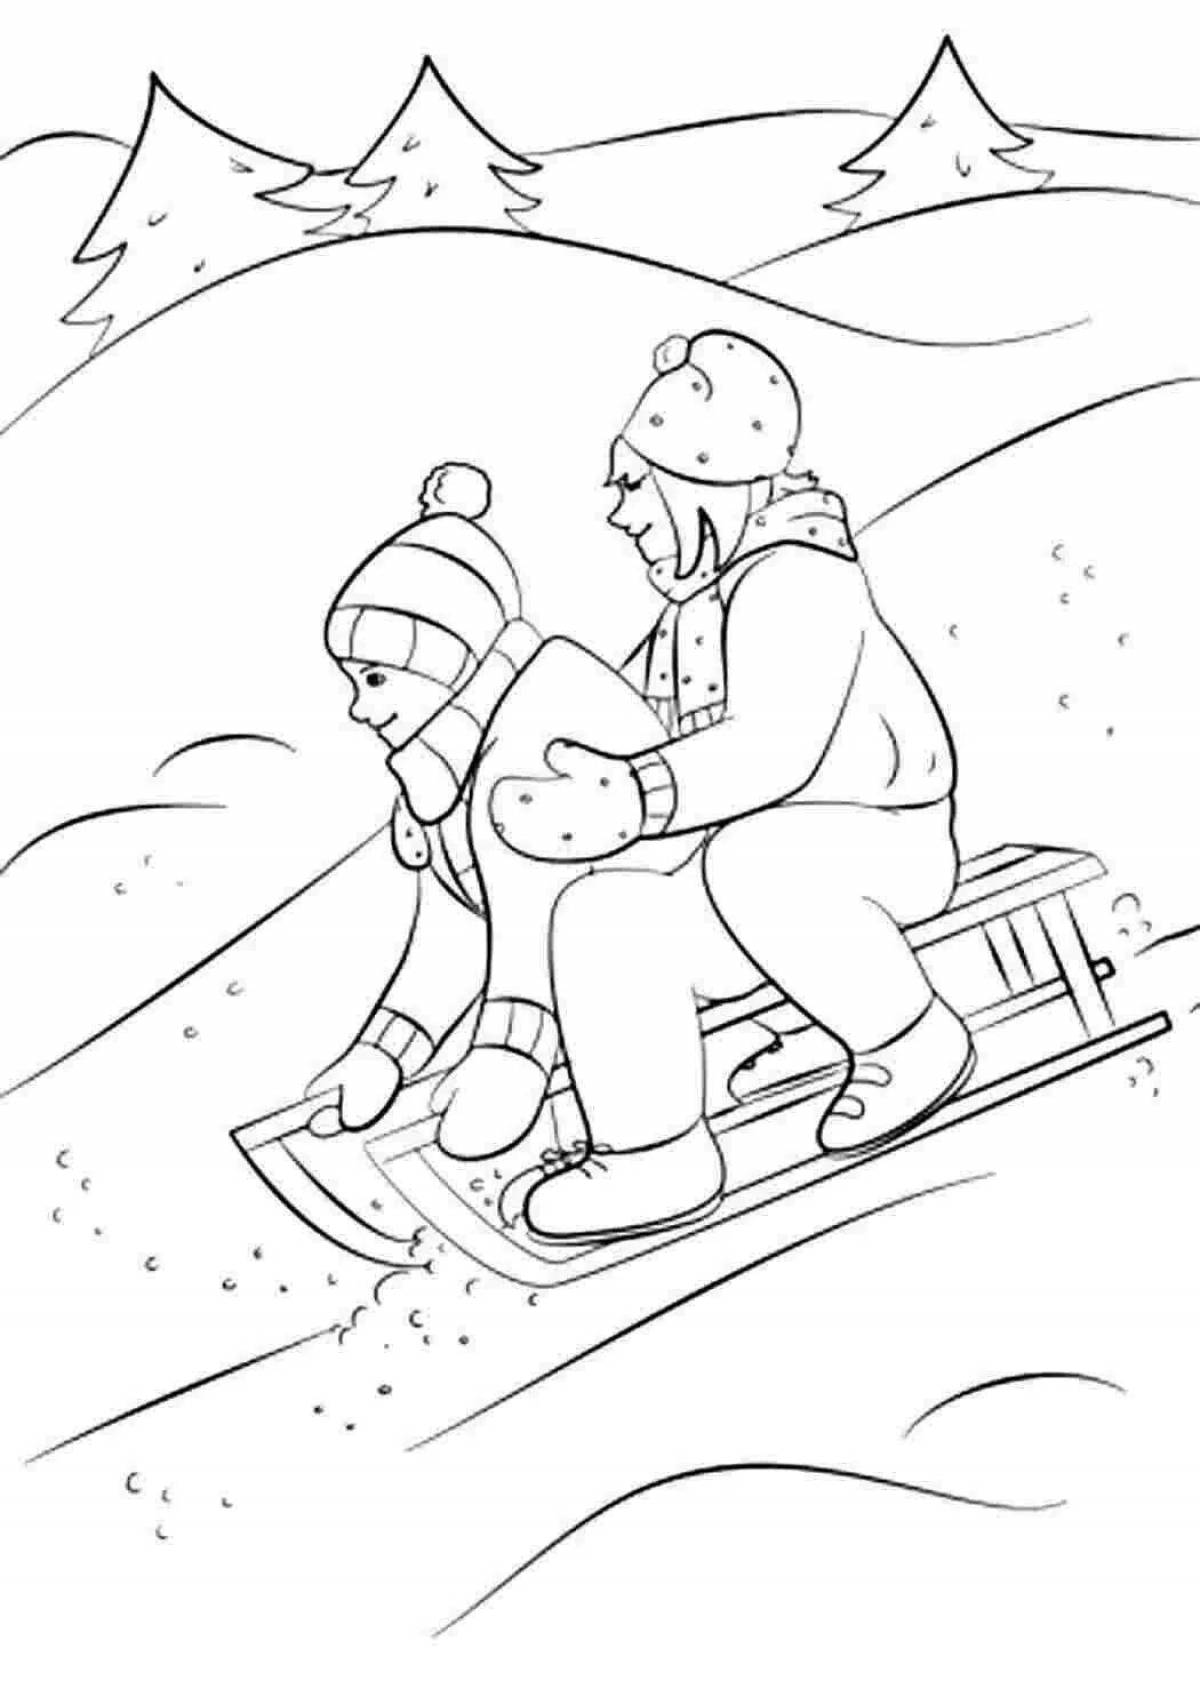 Colorful sledding coloring page